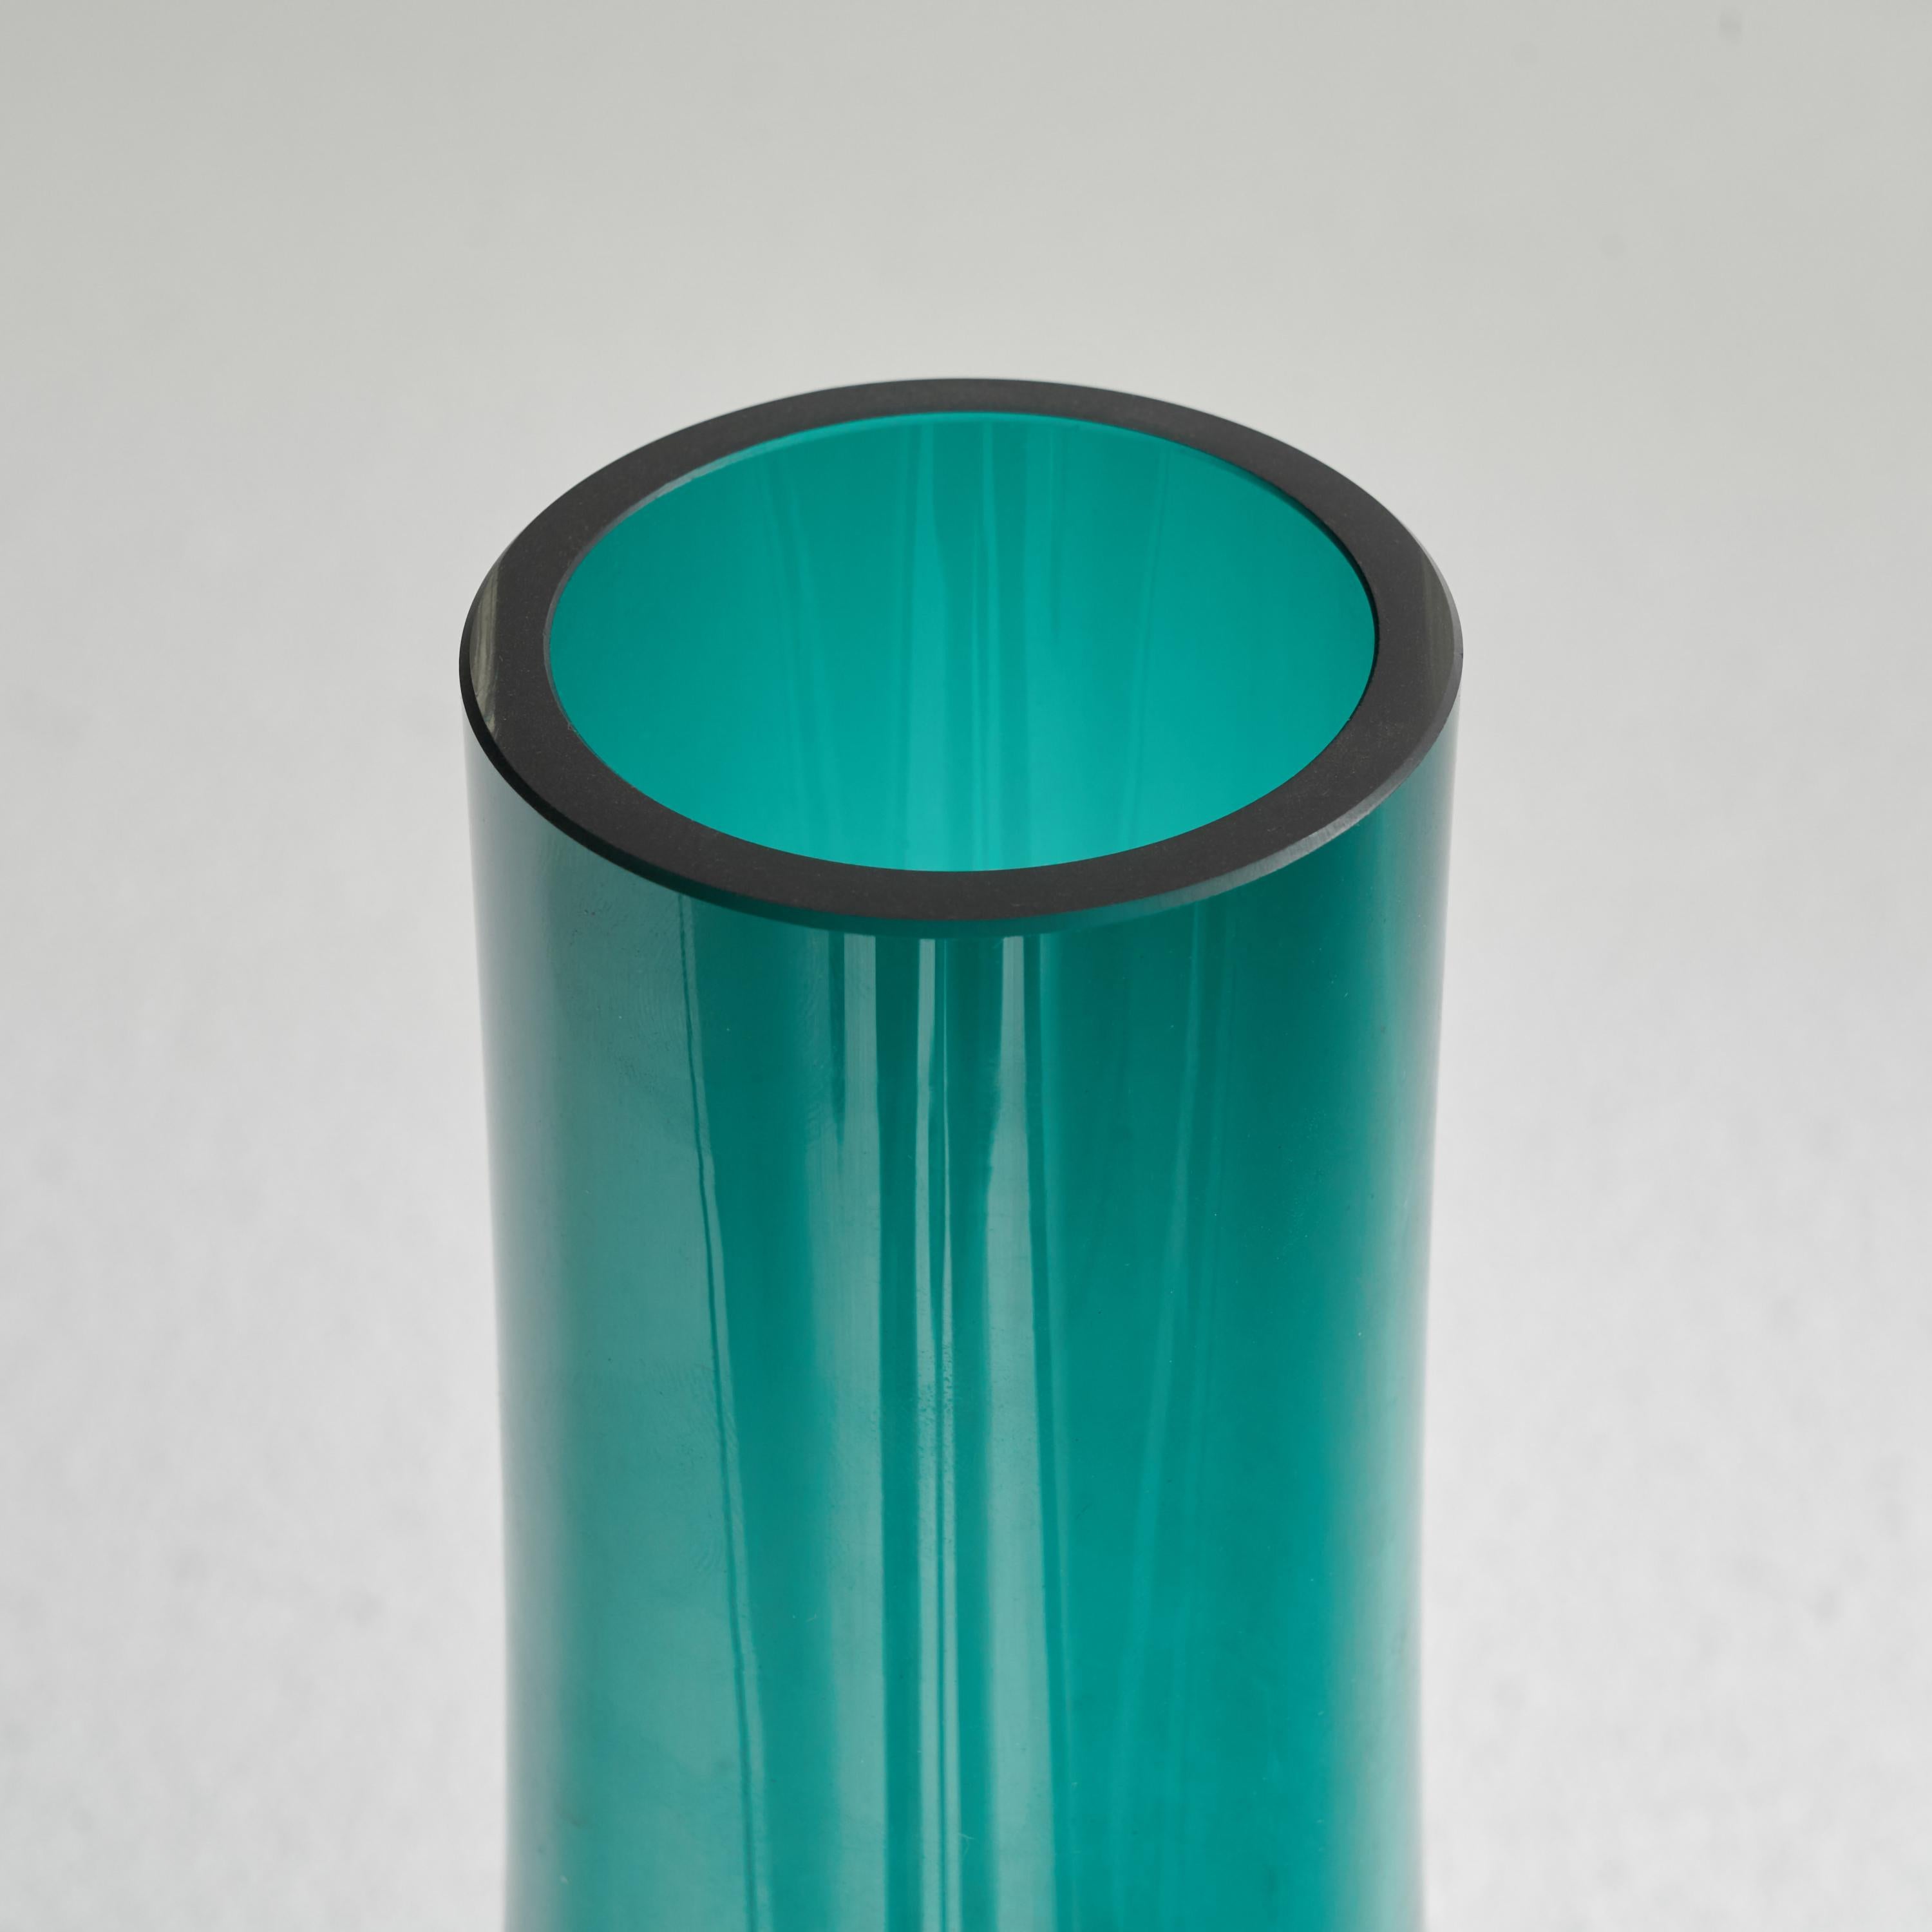 Riihimäen Lasi Oy tall Modernist glass vase. Finland, mid 20th century. 

Beautiful mid-century modernist art glass vase from Finland. Magnificent color and shape, making it a very interesting piece of glass art. Made by Riihimäen Lasi Oy /